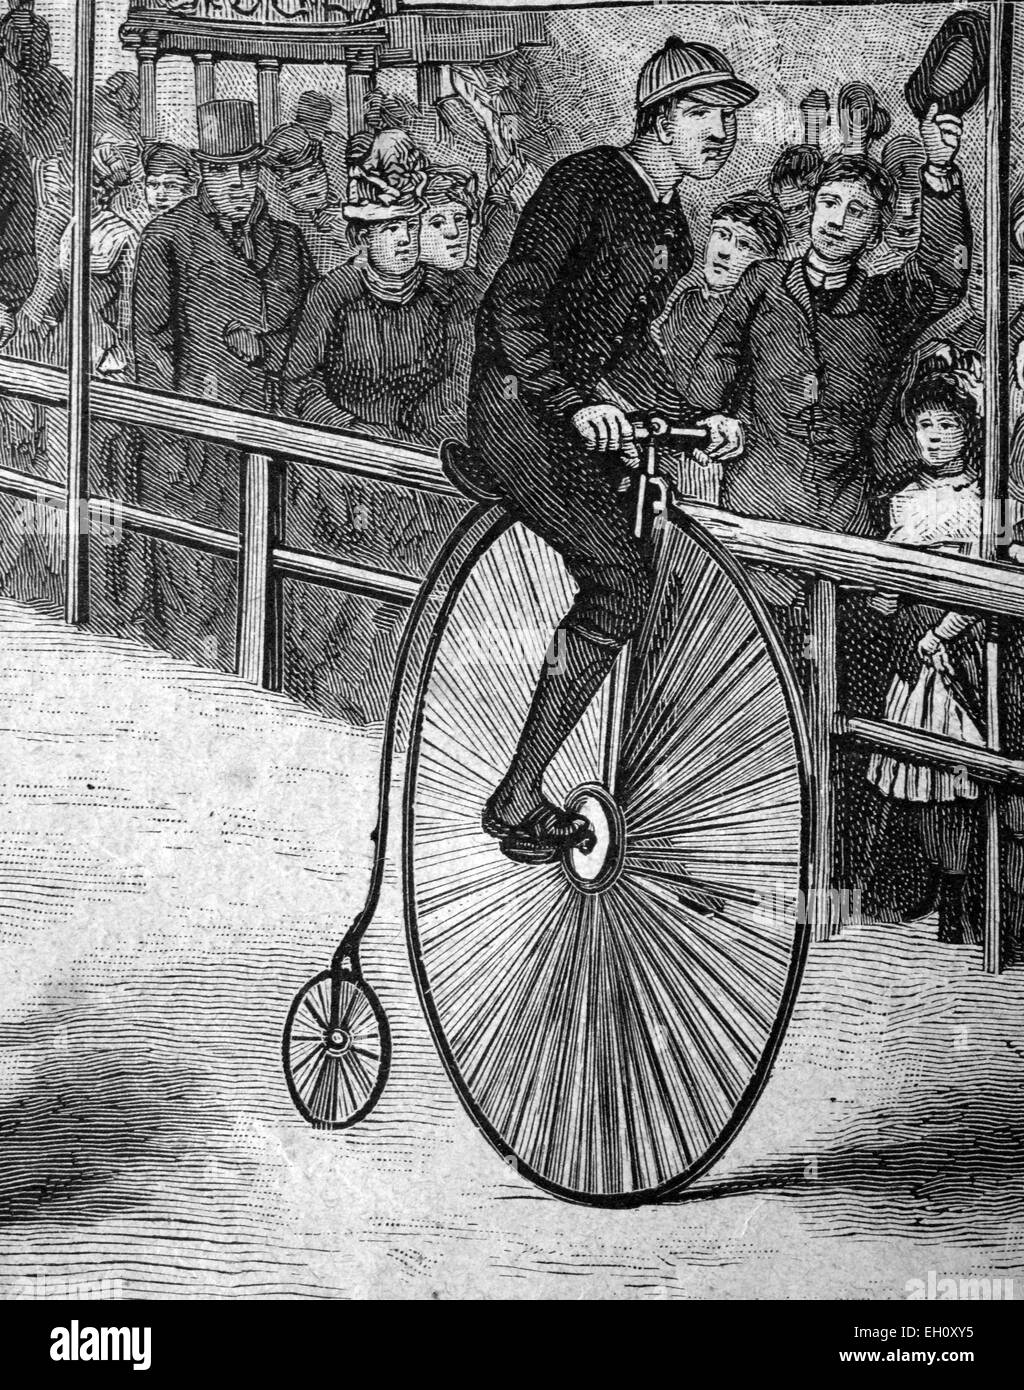 Man riding a Penny Farthing location, illustration historique, vers 1886 Banque D'Images